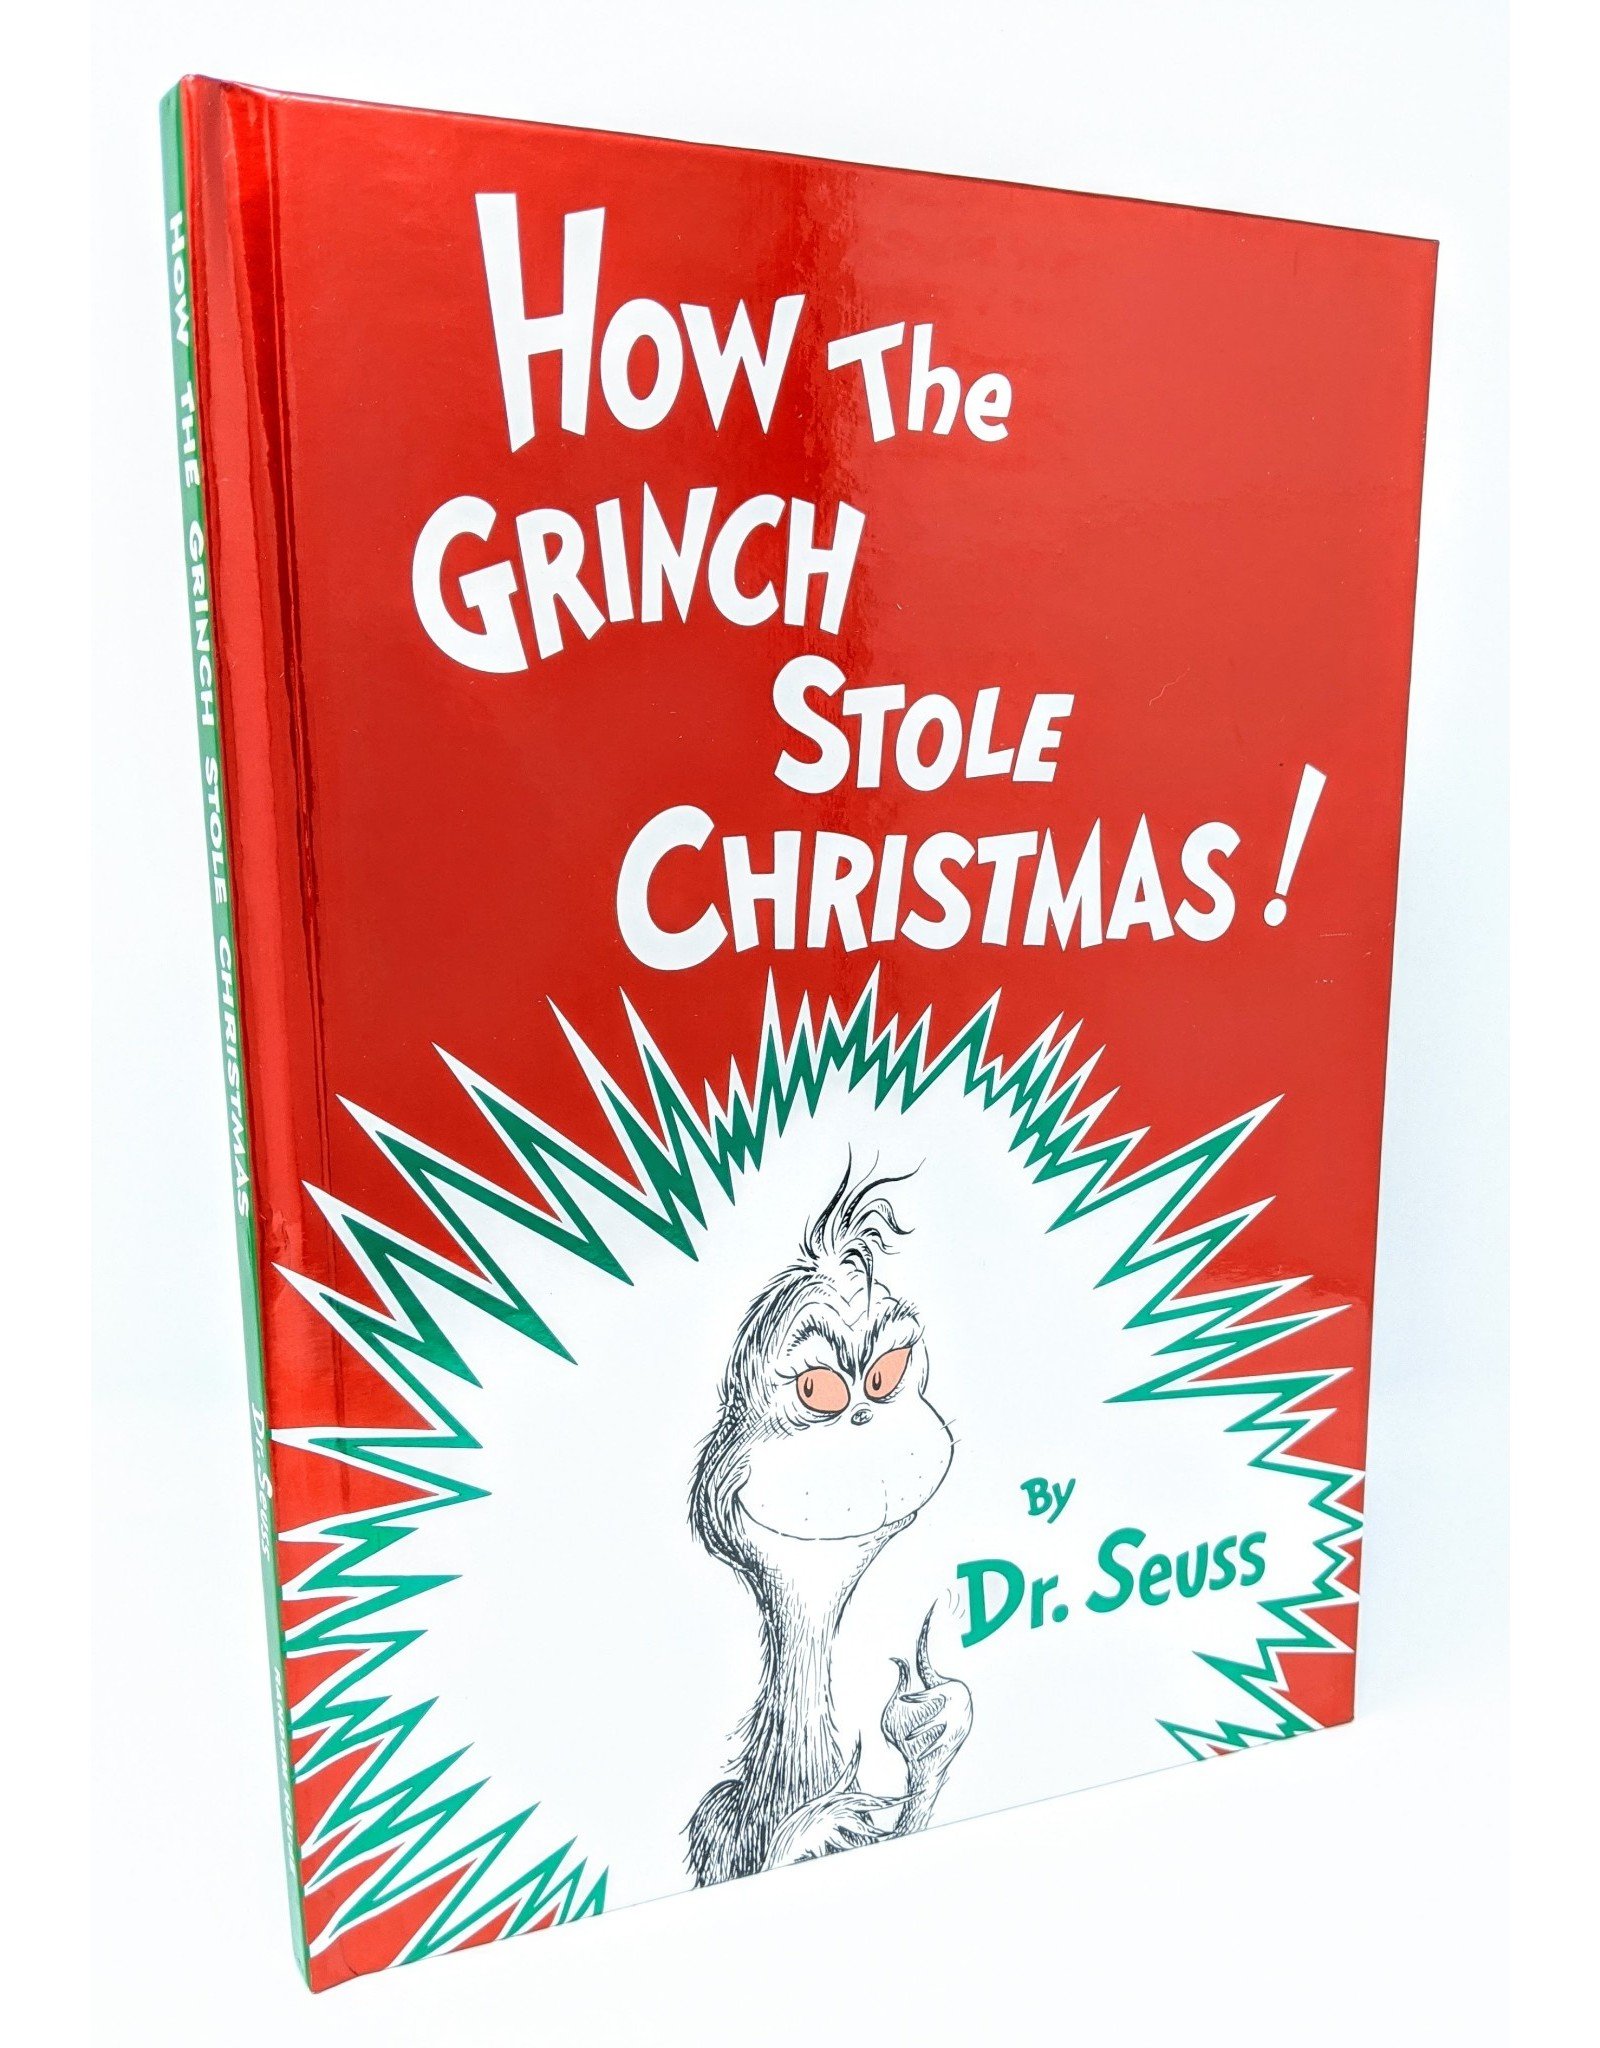 Dr. Seuss How The Grinch Stole Christmas by Dr. Seuss - large